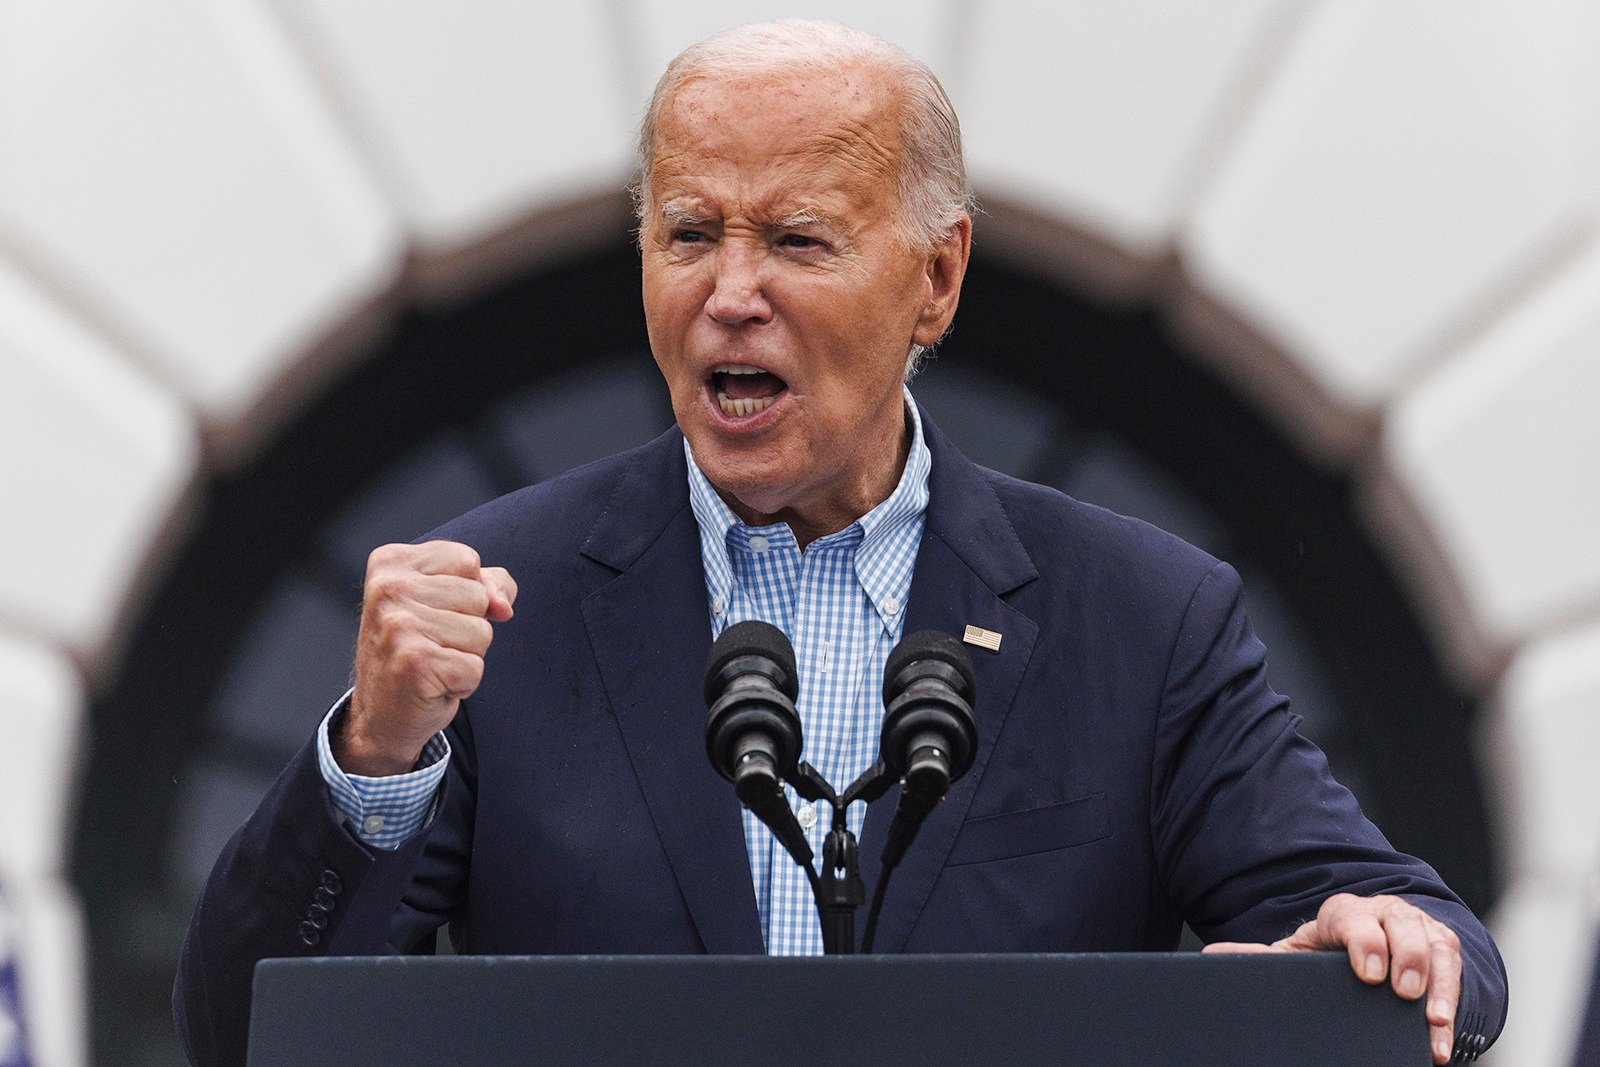 US President Joe Biden speaking at a Fourth of July event on the South Lawn of the White House. The “us vs them” approach of favouring some countries and ostracising others stokes ideological confrontation. Photo: Getty Images/TNS